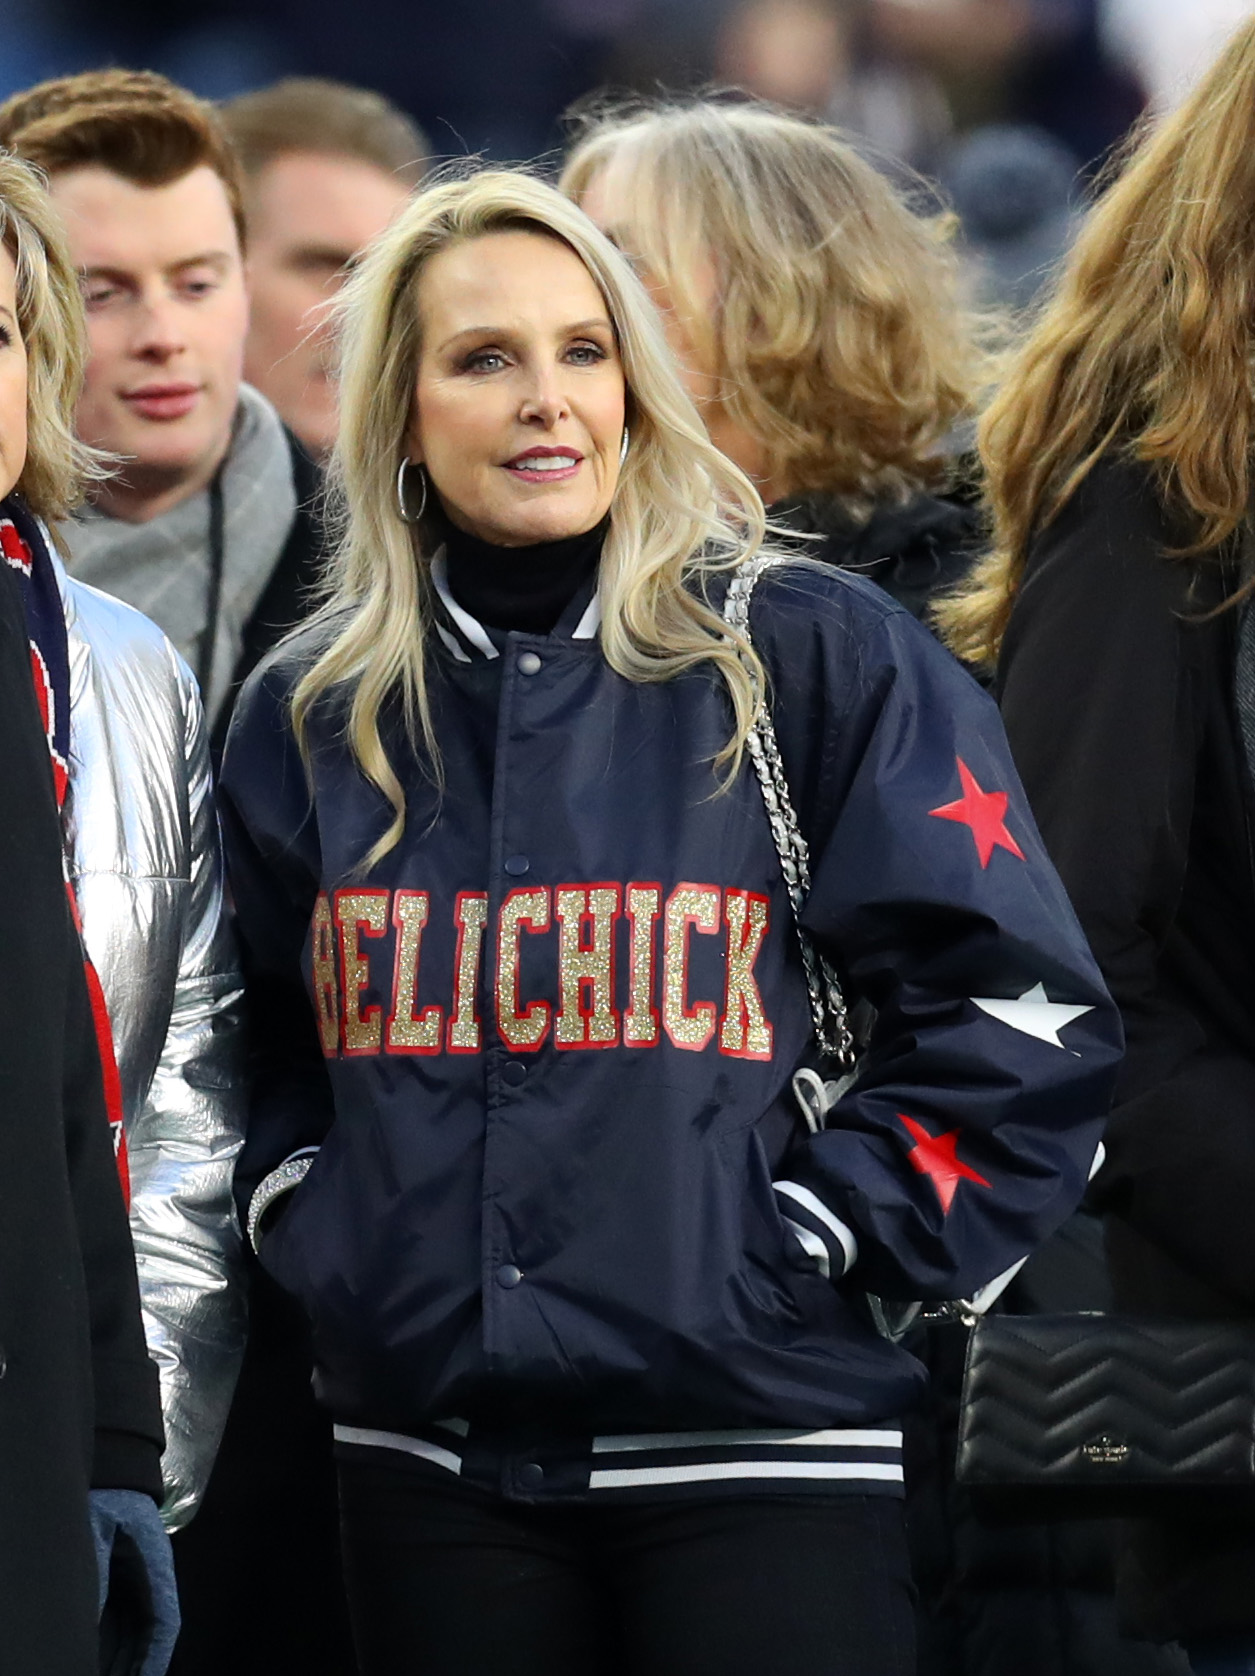 Linda Hollidayon the sideline before the game between the New England Patriots and the Buffalo Bills in 2019, in Foxborough, Massachusetts. | Source: Getty Images